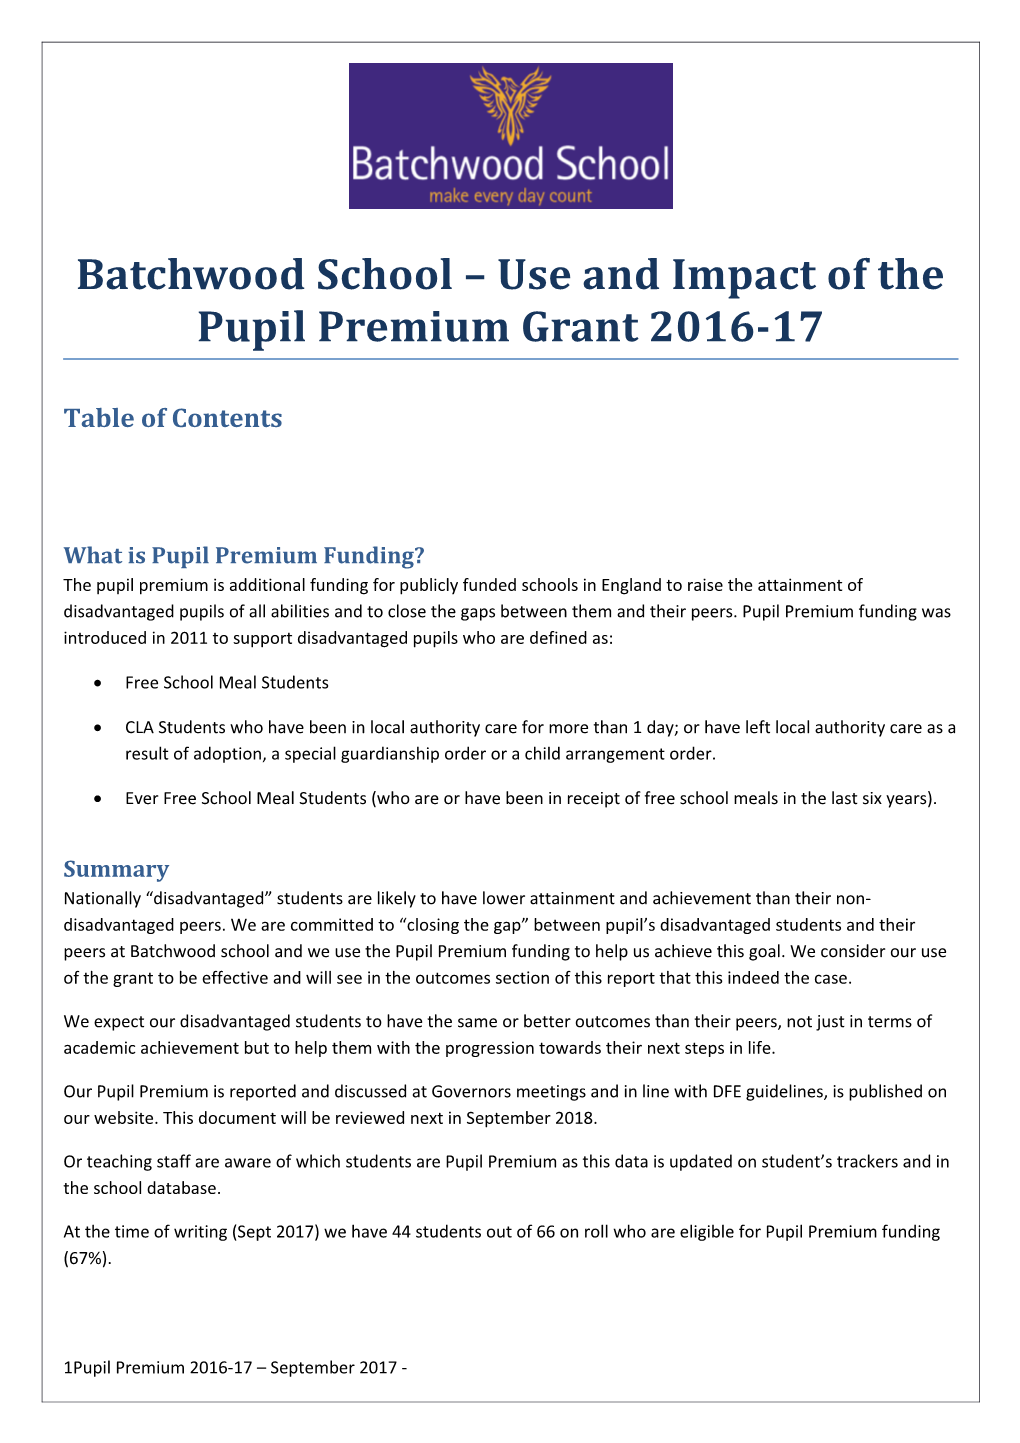 Batchwood School Use and Impact of the Pupil Premium Grant 2016-17